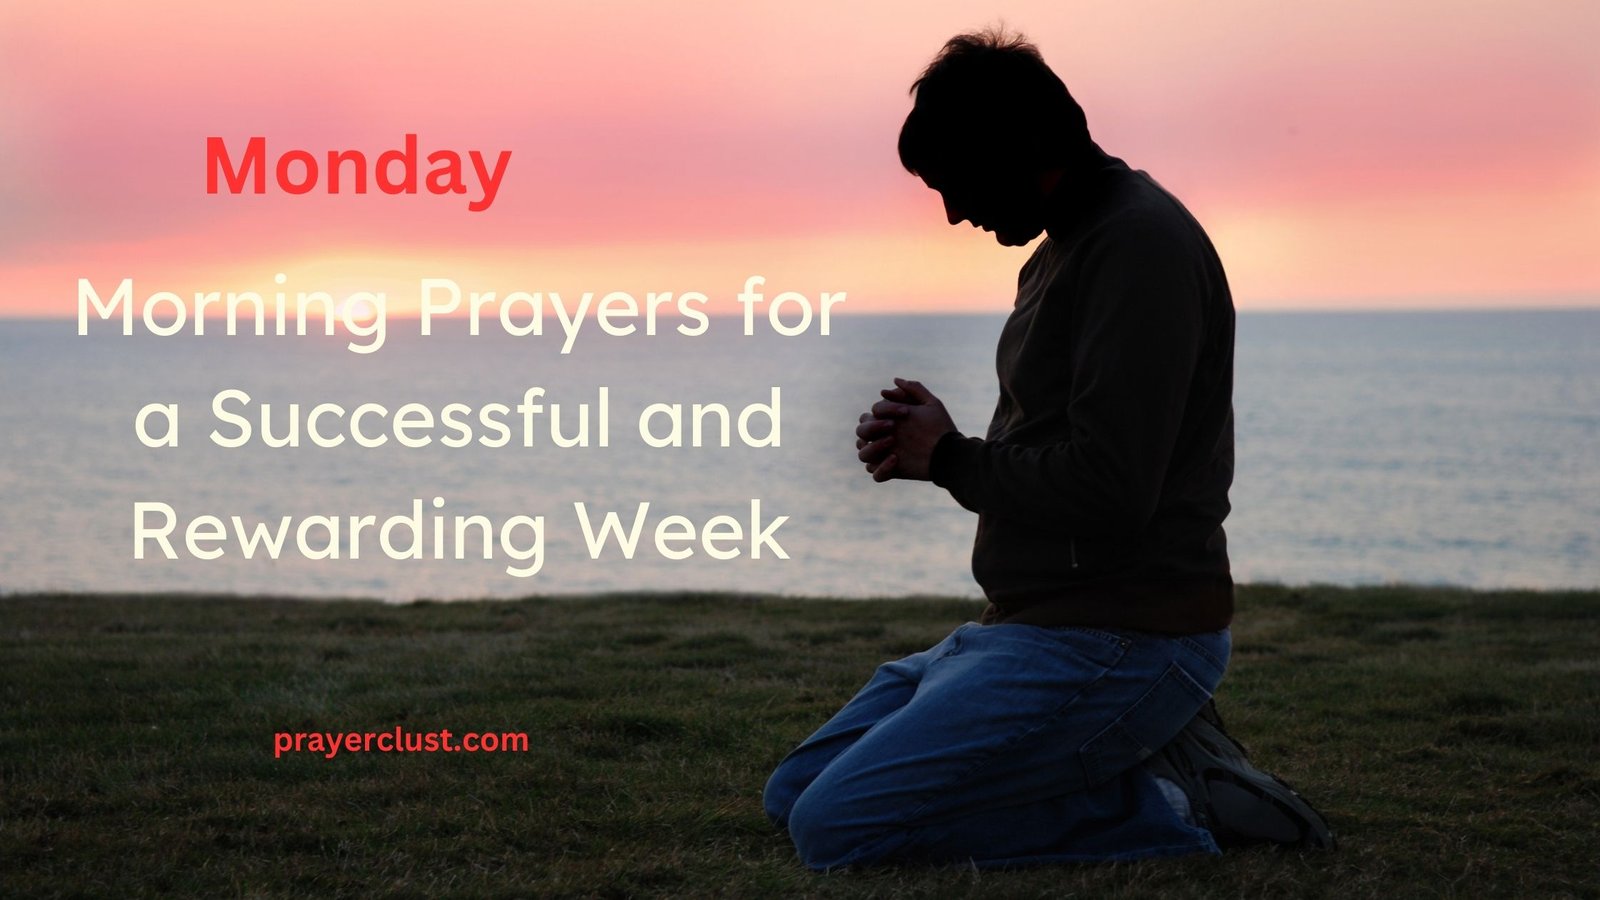 Monday Morning Prayers for a Successful and Rewarding Week